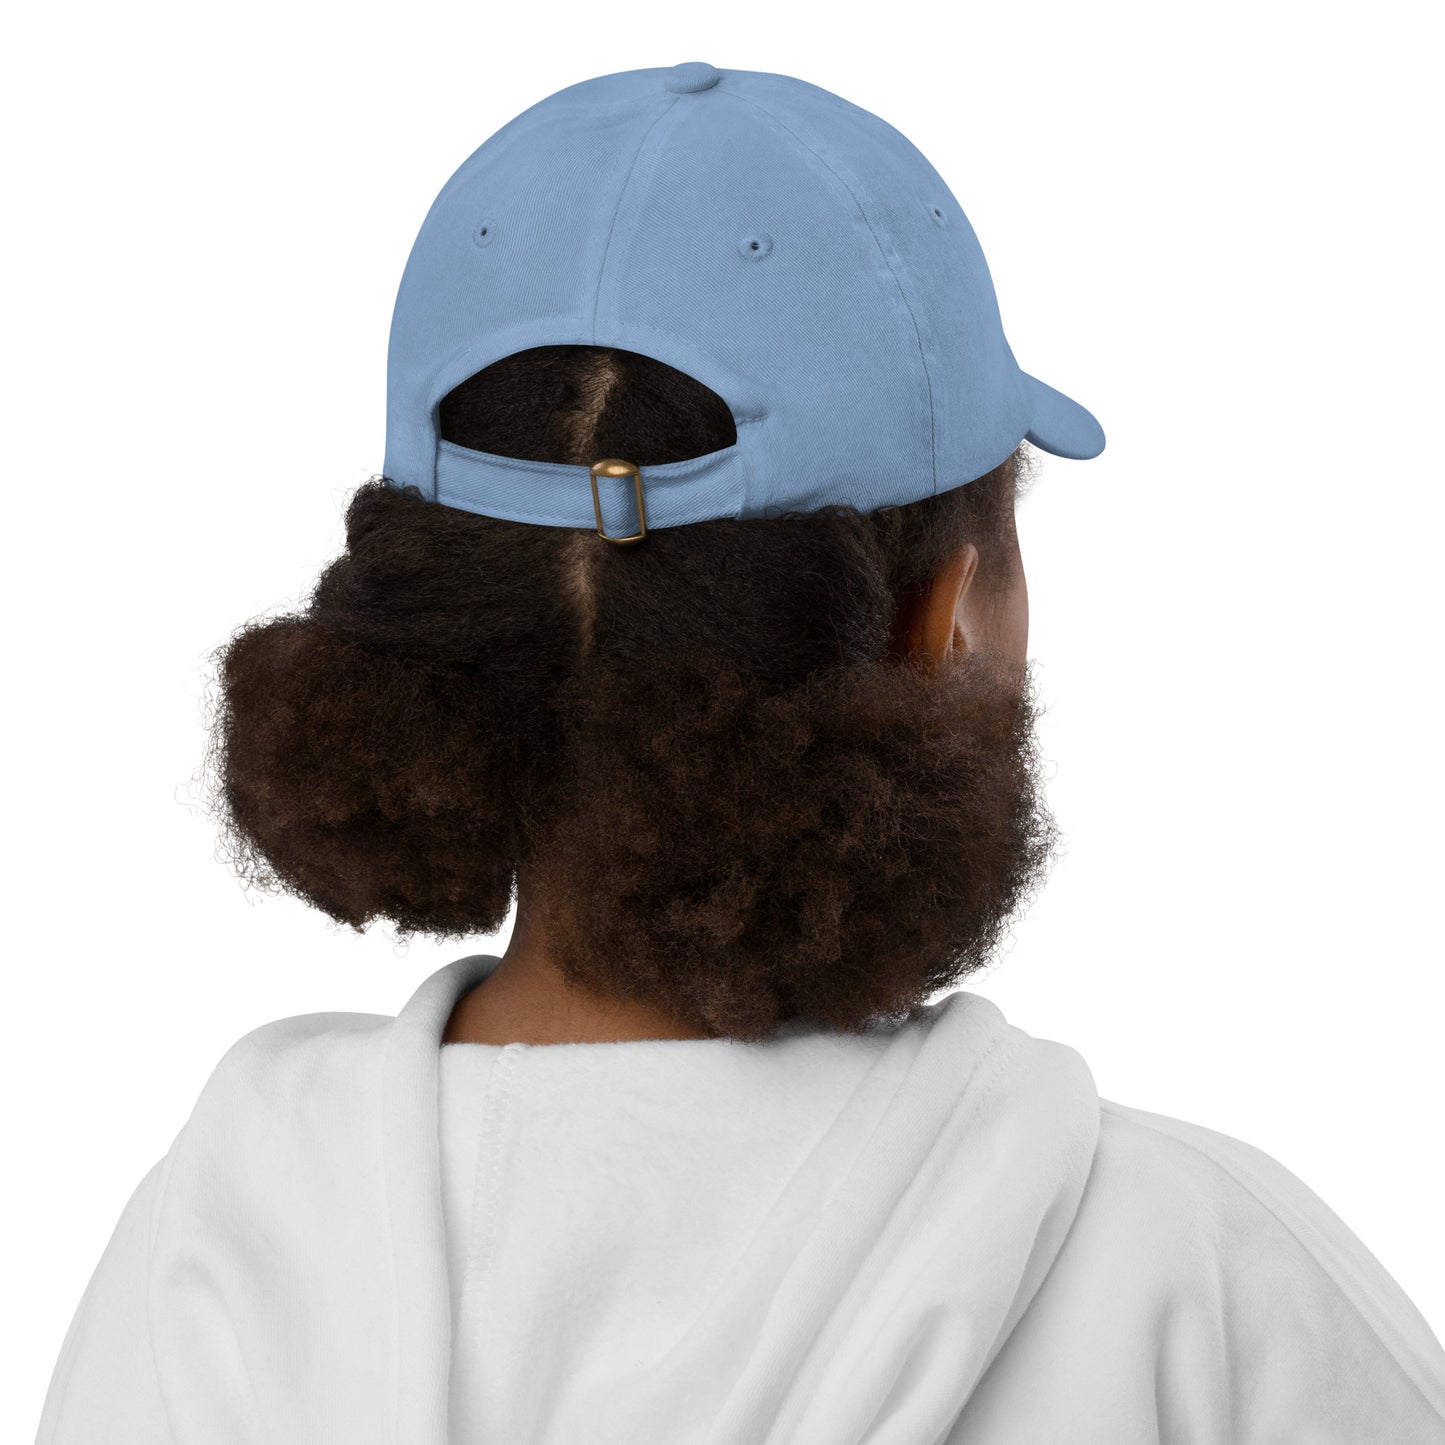 Groovy Kid's Baseball Cap - White • YVR Vancouver • YHM Designs - Image 07